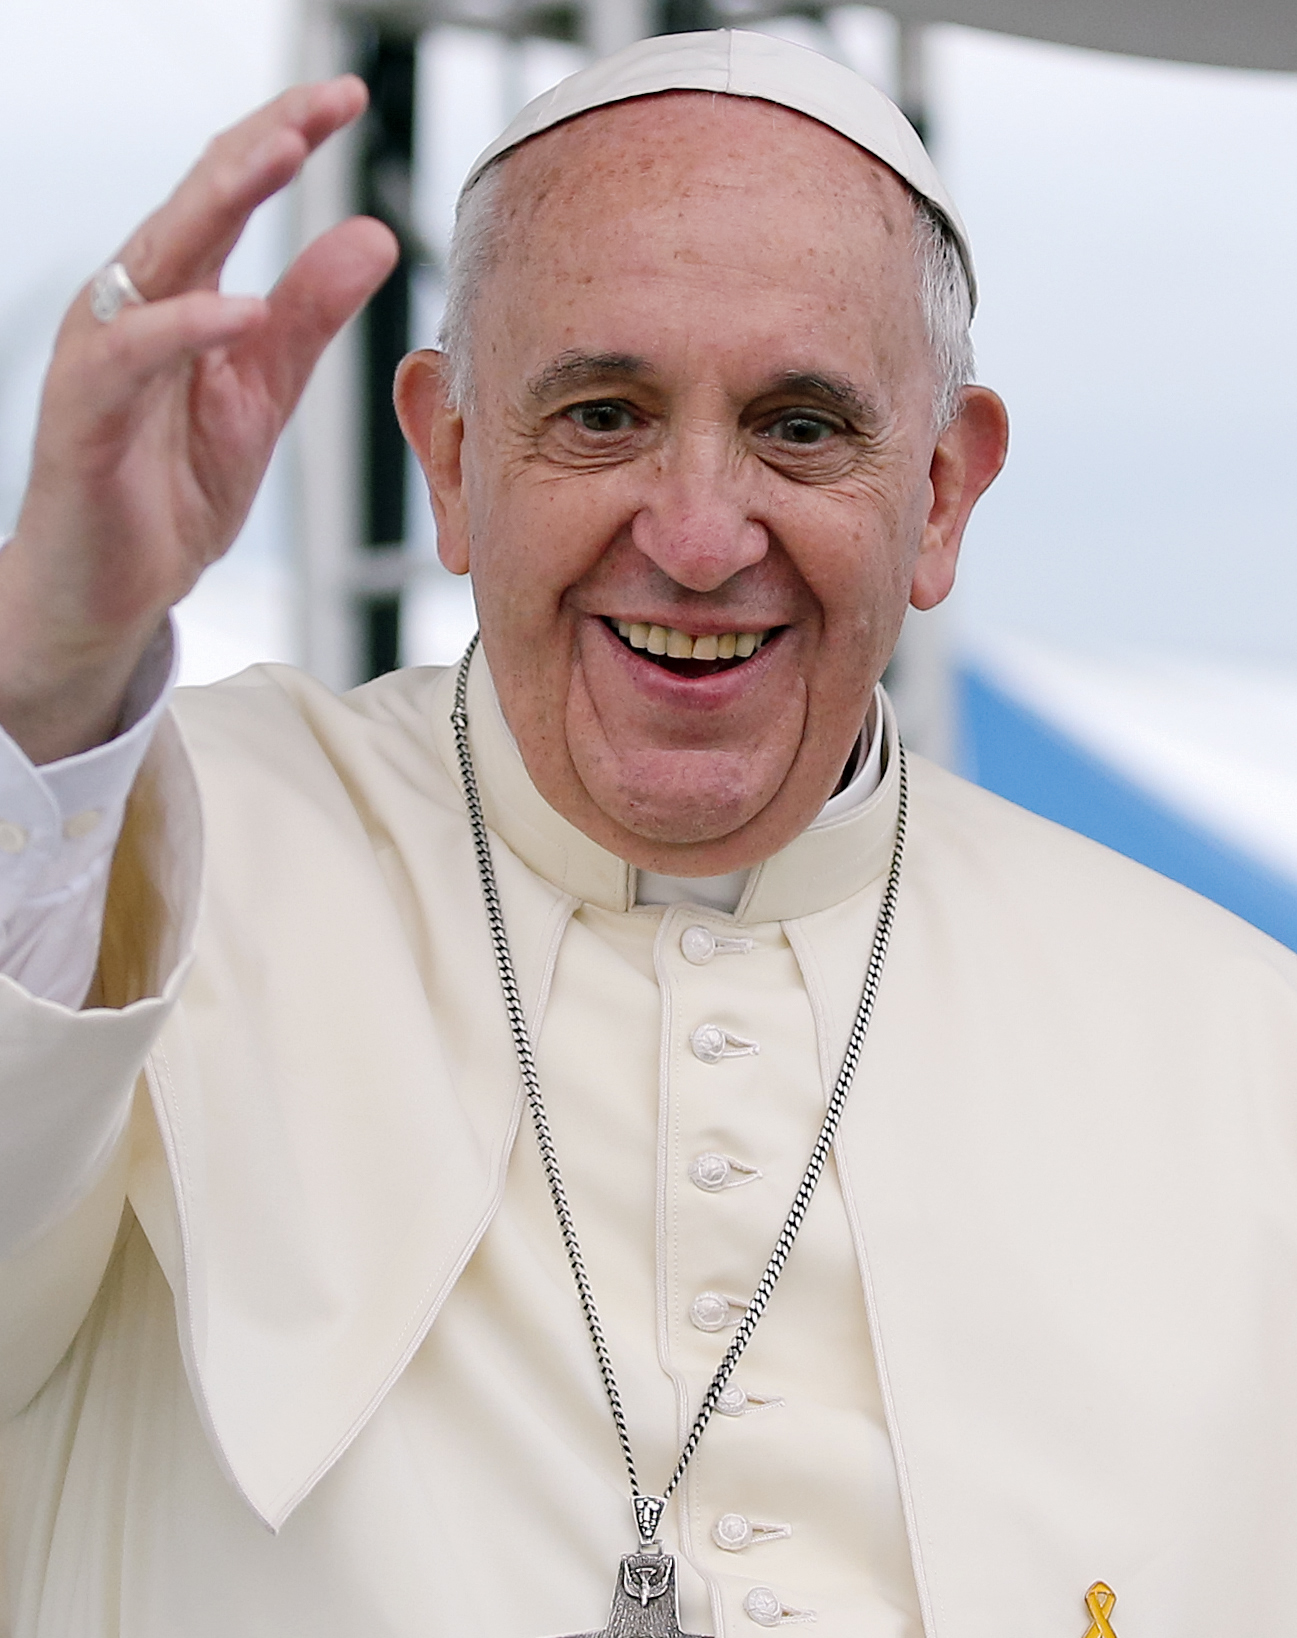 Latin American perspective on Papa Francisco reveals genuine dedicated to change - Ahead of the Trend of the Trend